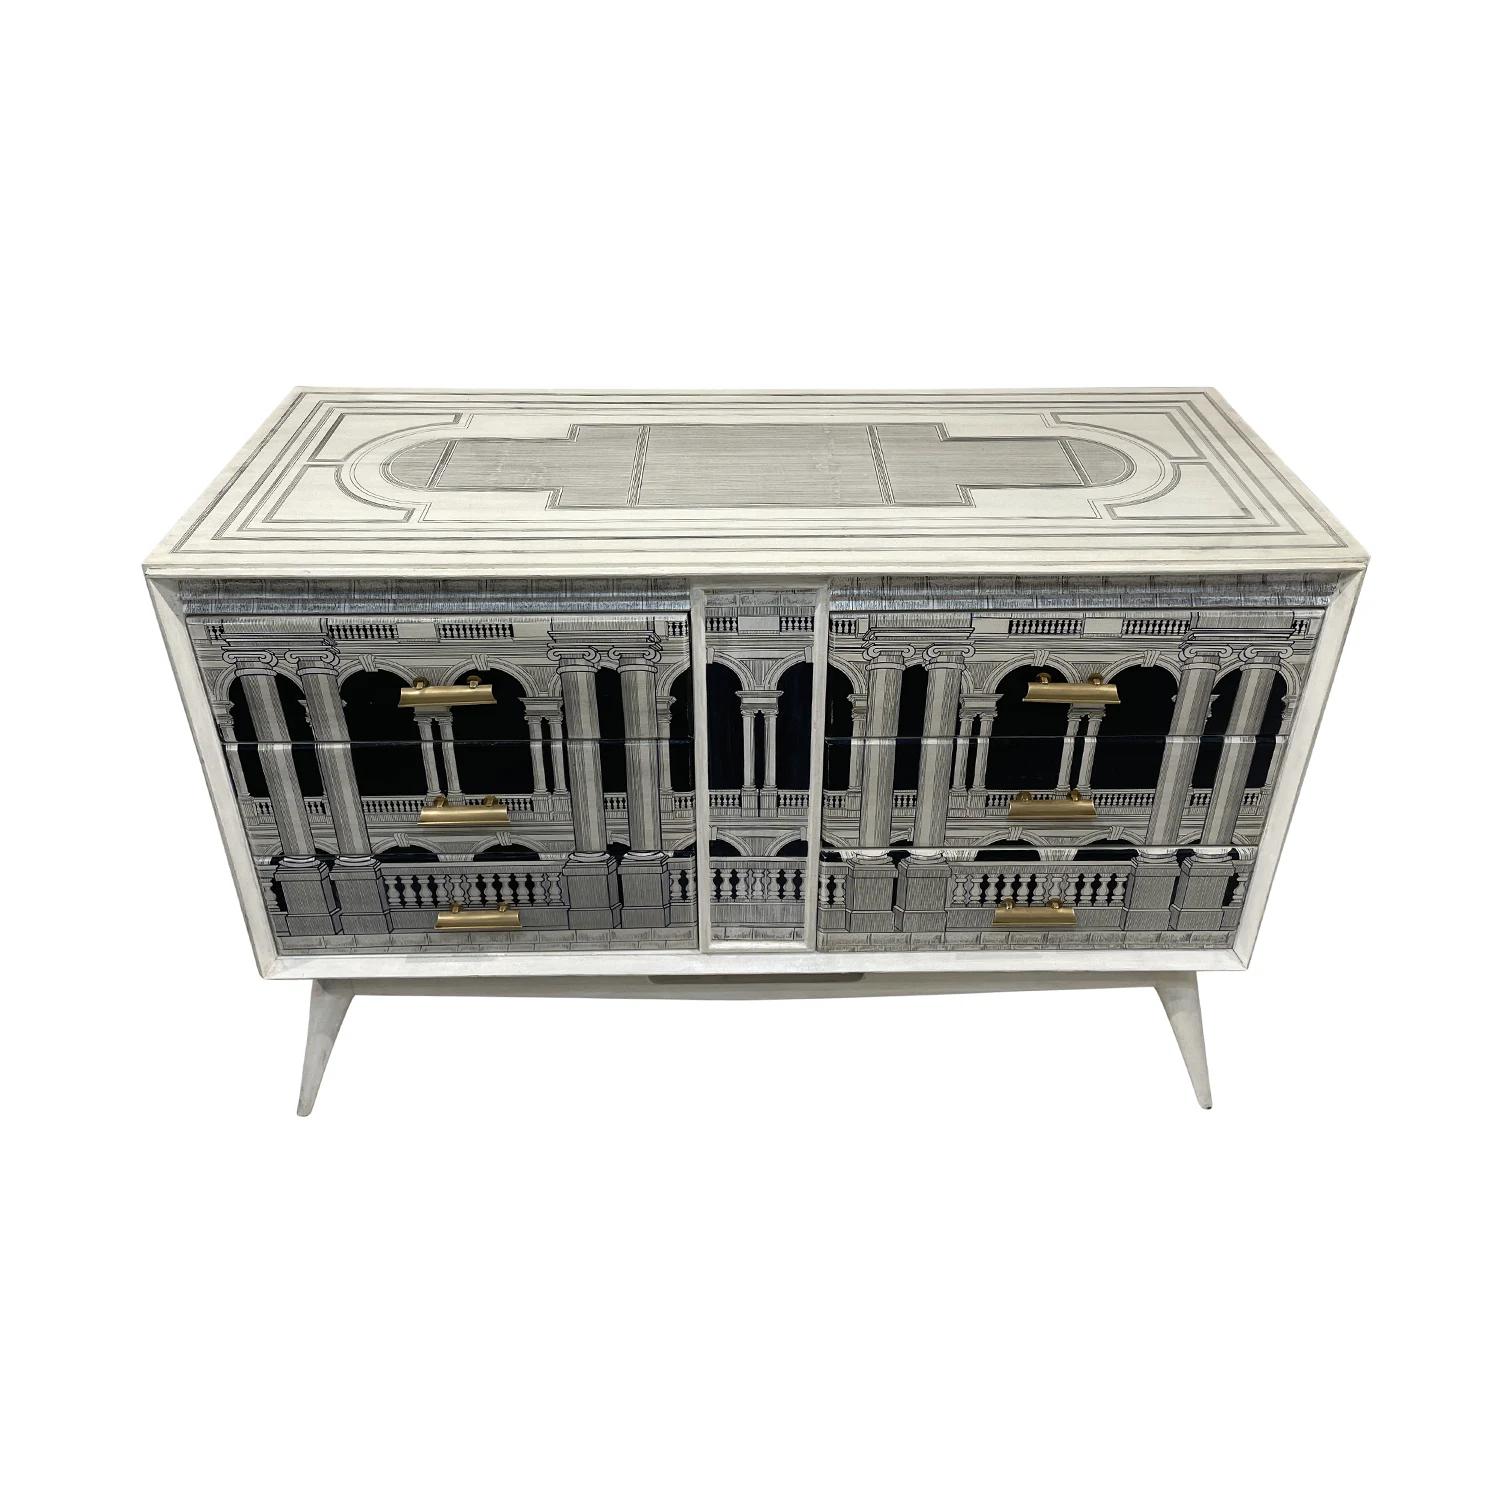 A white-black, vintage Mid-Century Modern Italian dresser, chest made of handcrafted lacquered, painted Walnut in the style of Piero Fornasetti in good condition. The front side of the commode is particularized with architectural renderings. The